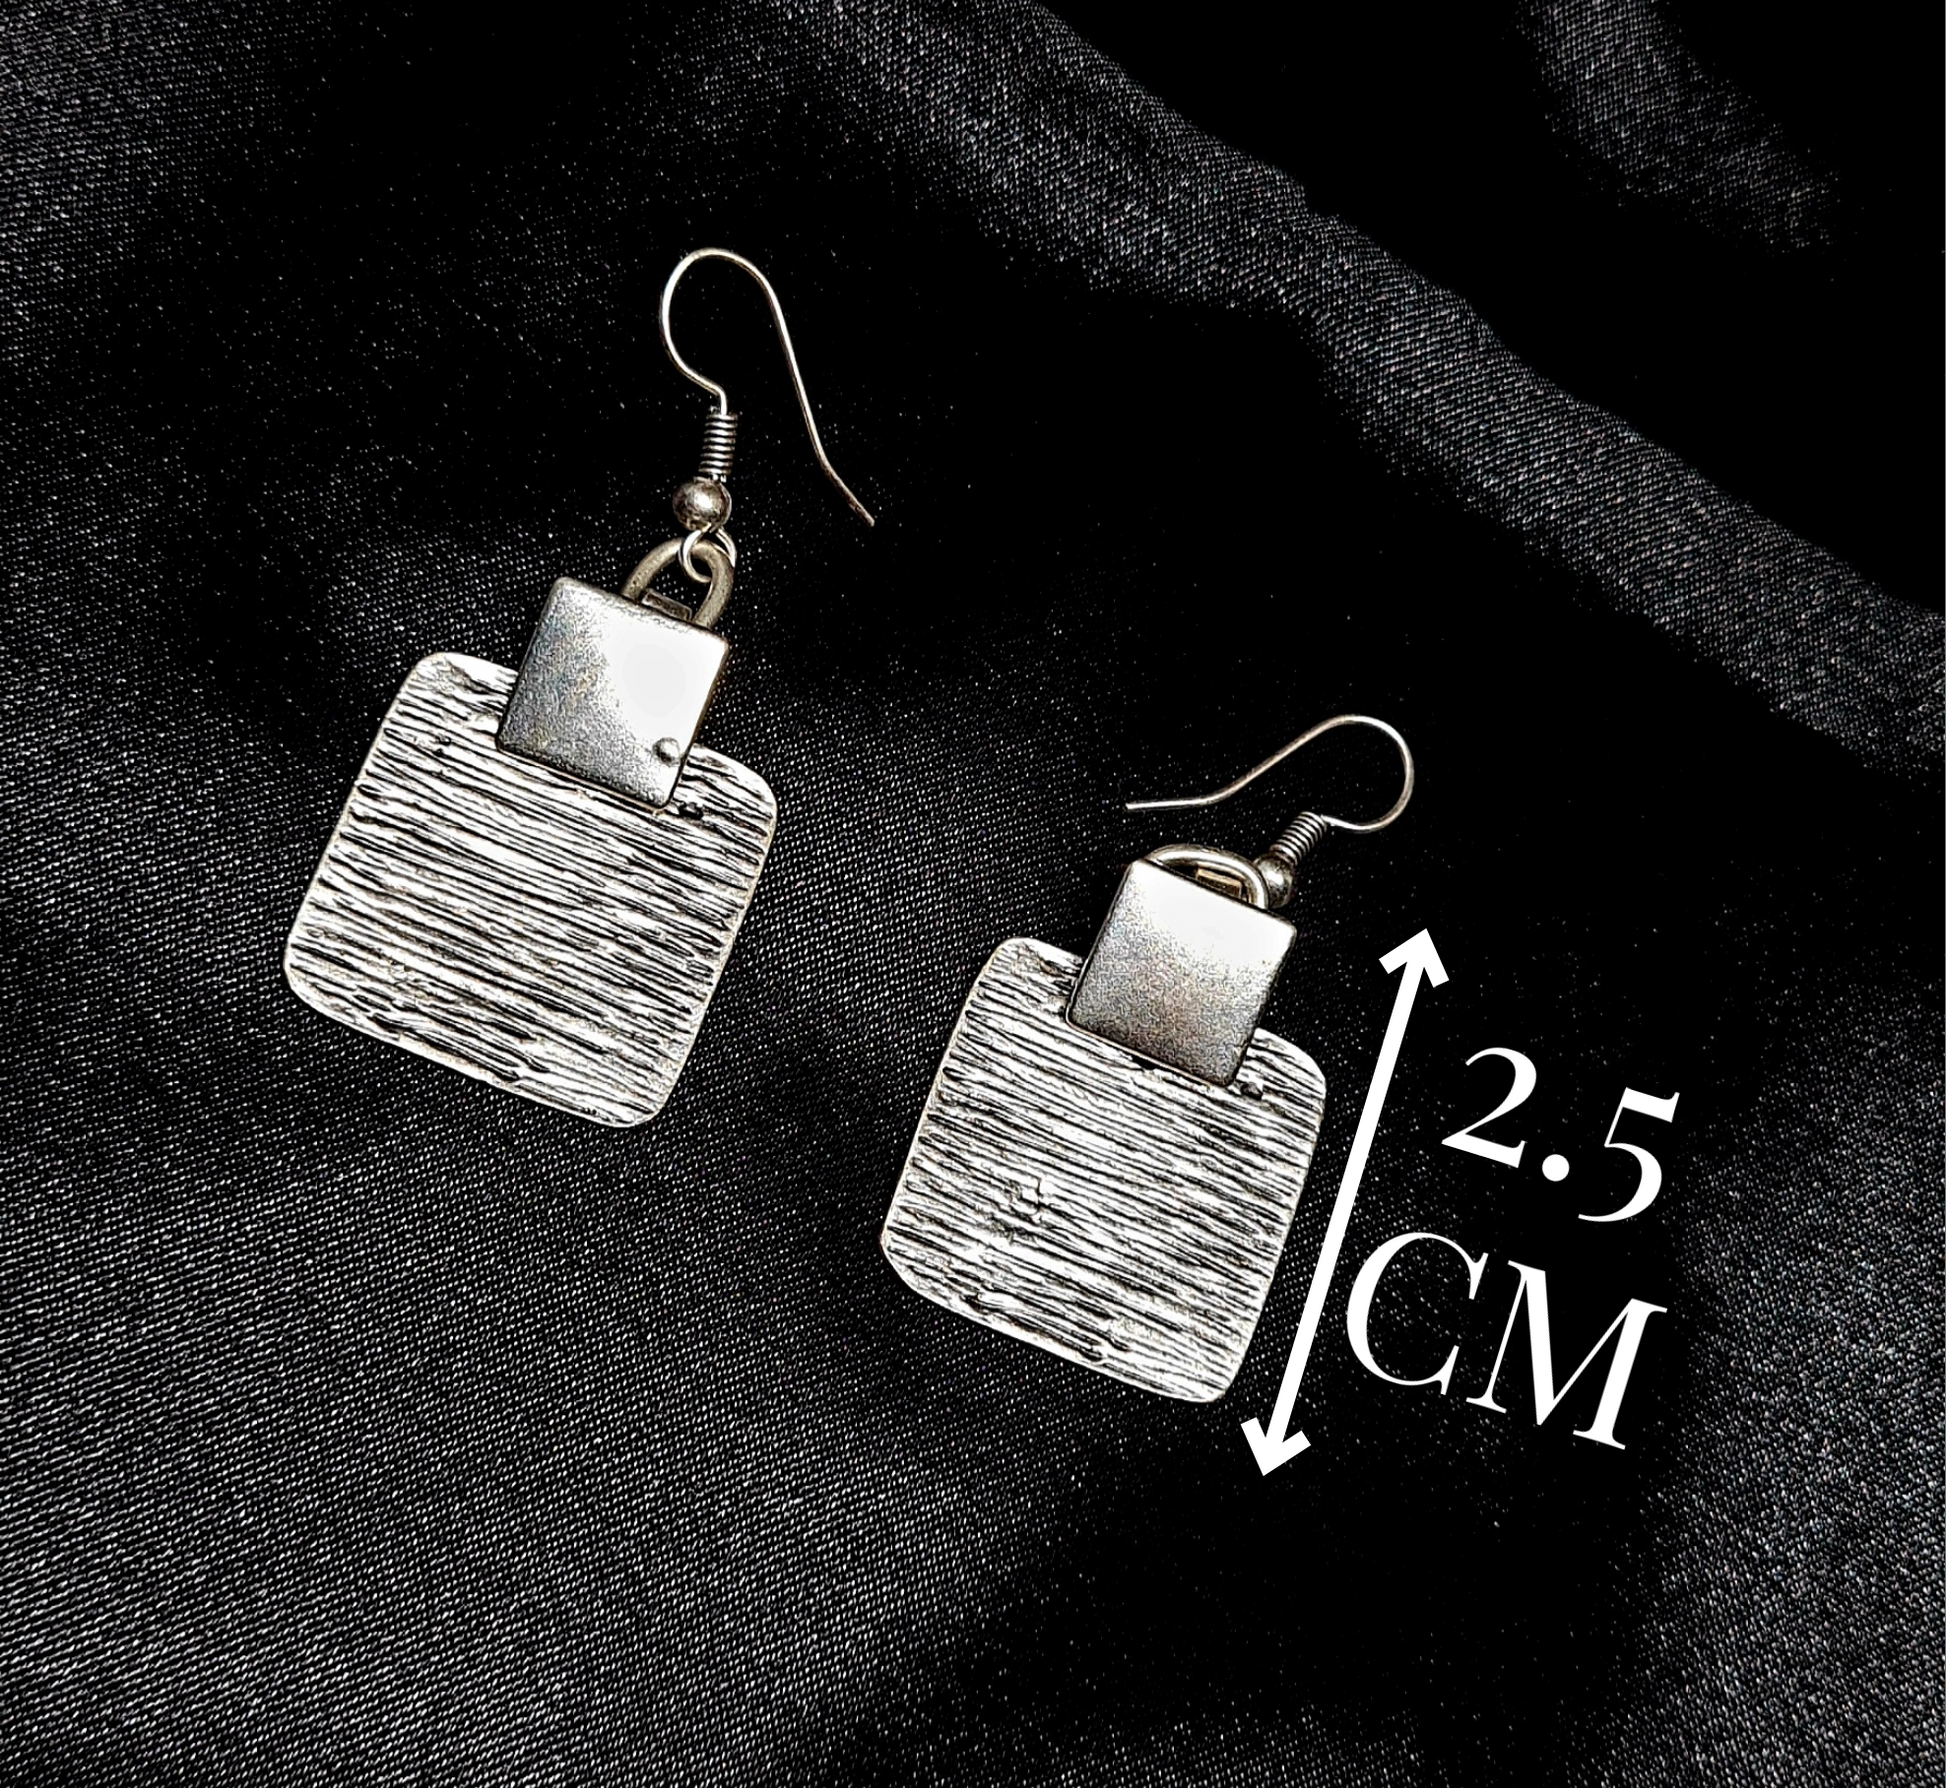 Calista Silver Earrings a delicate design and exceptional craftsmanship.